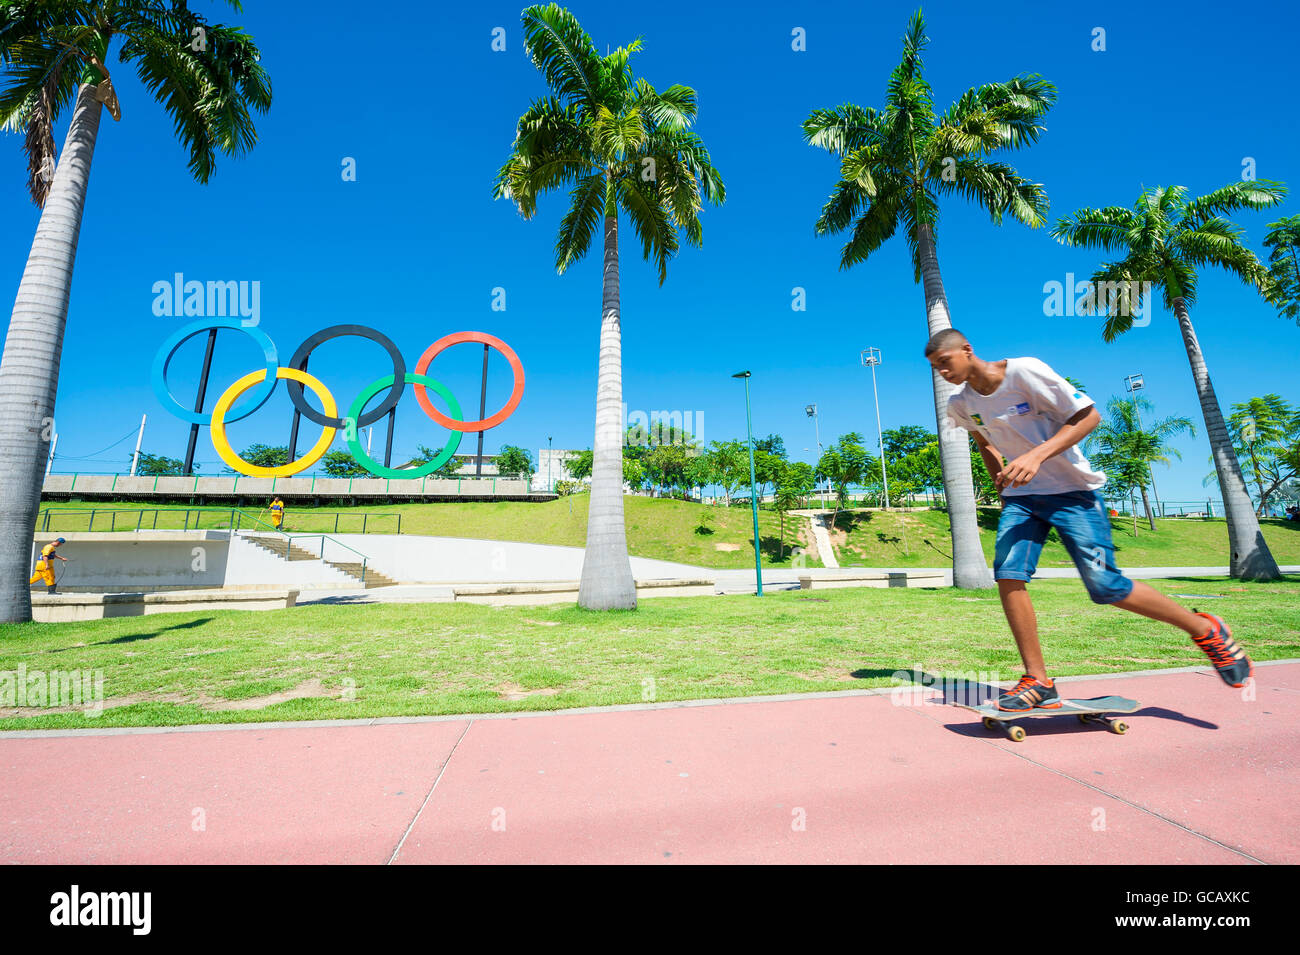 RIO DE JANEIRO - MARCH 18, 2016: A young skateboarder skates in front of Olympic rings installed for the 2016 Summer Games. Stock Photo